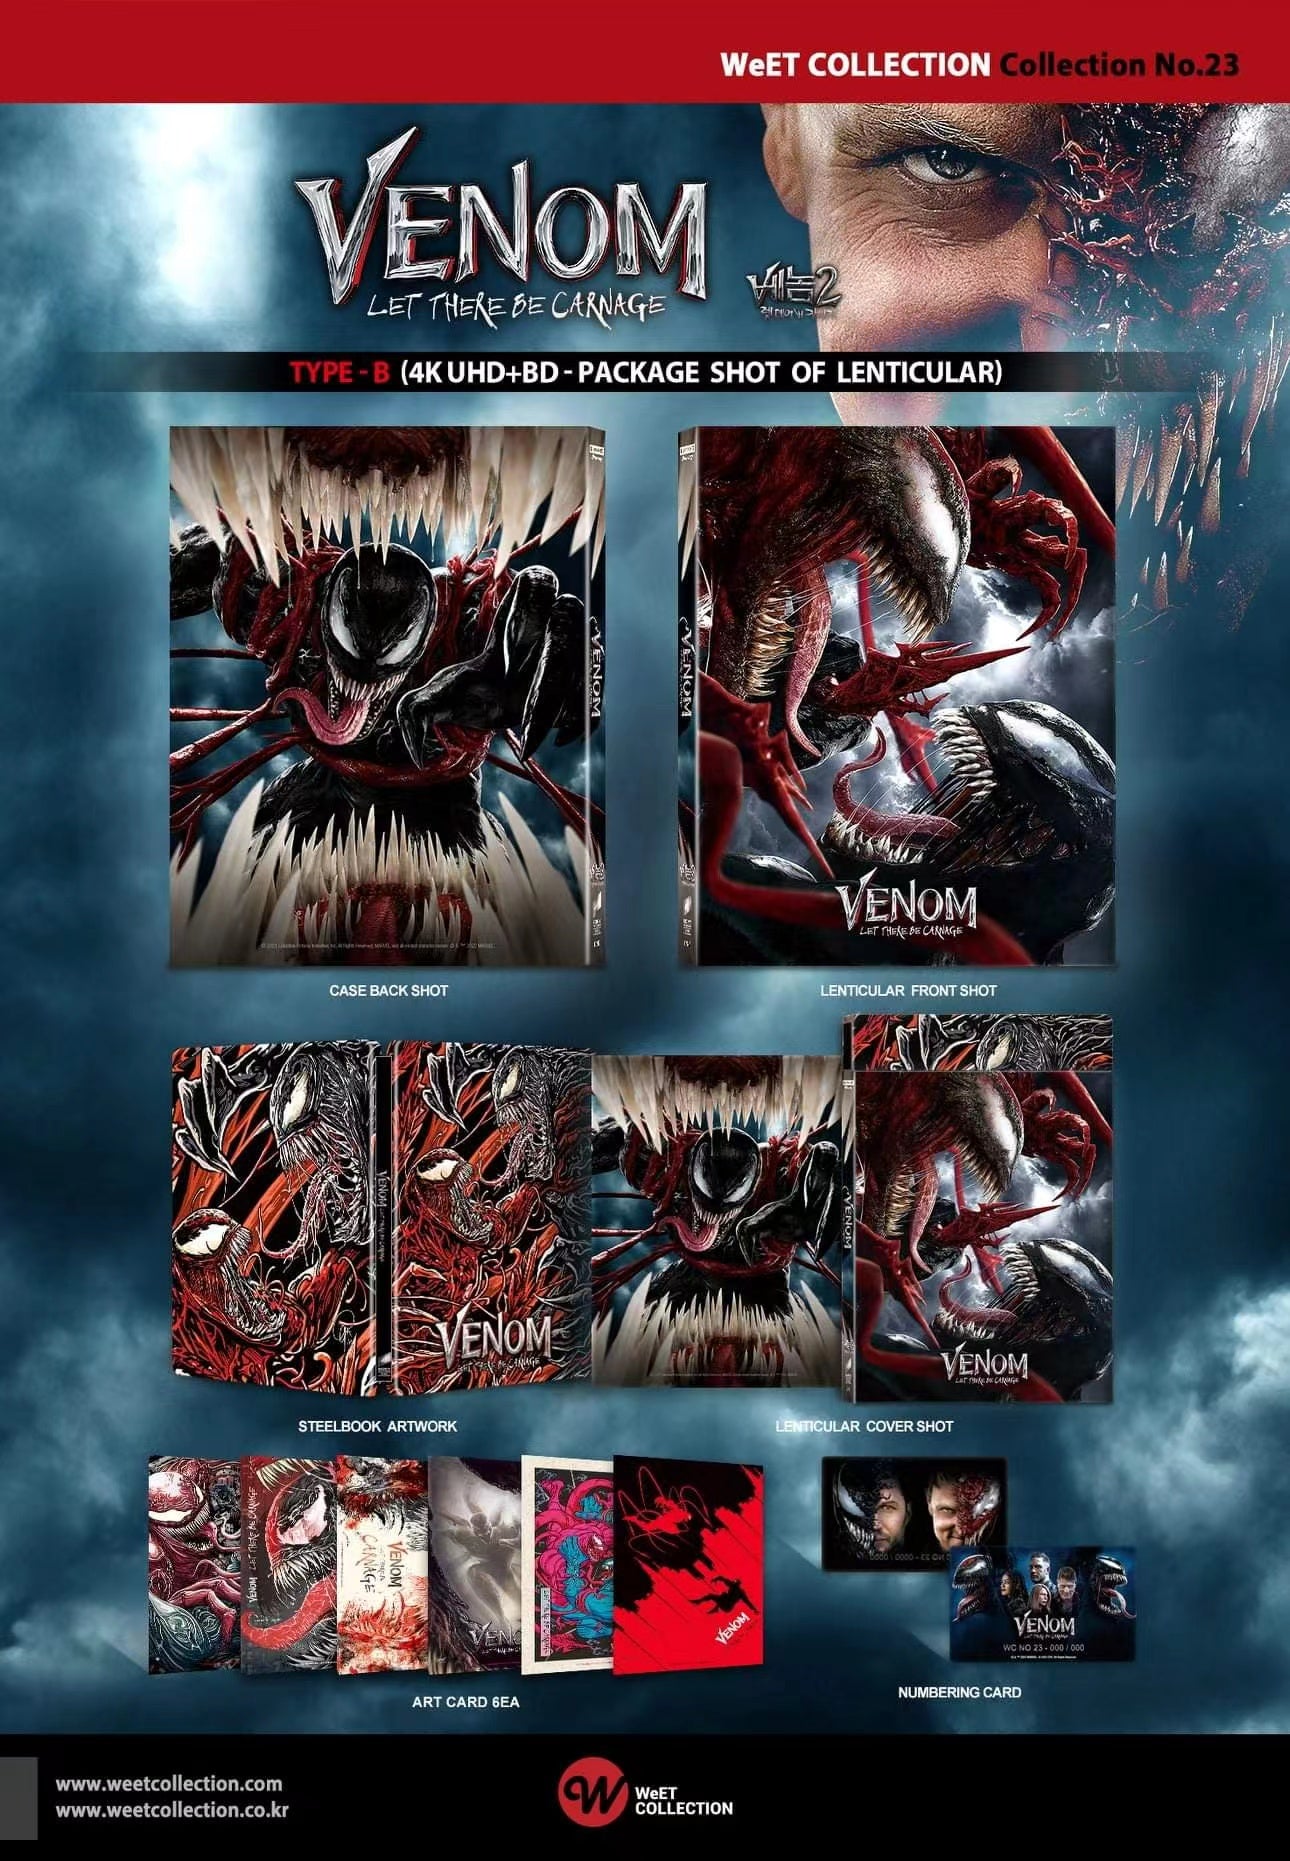 Venom 2: Let There Be Carnage 4K UHD/Blu-Ray Steelbook WEET collection No.23 One Click Set (Lenticular + Full Slip)